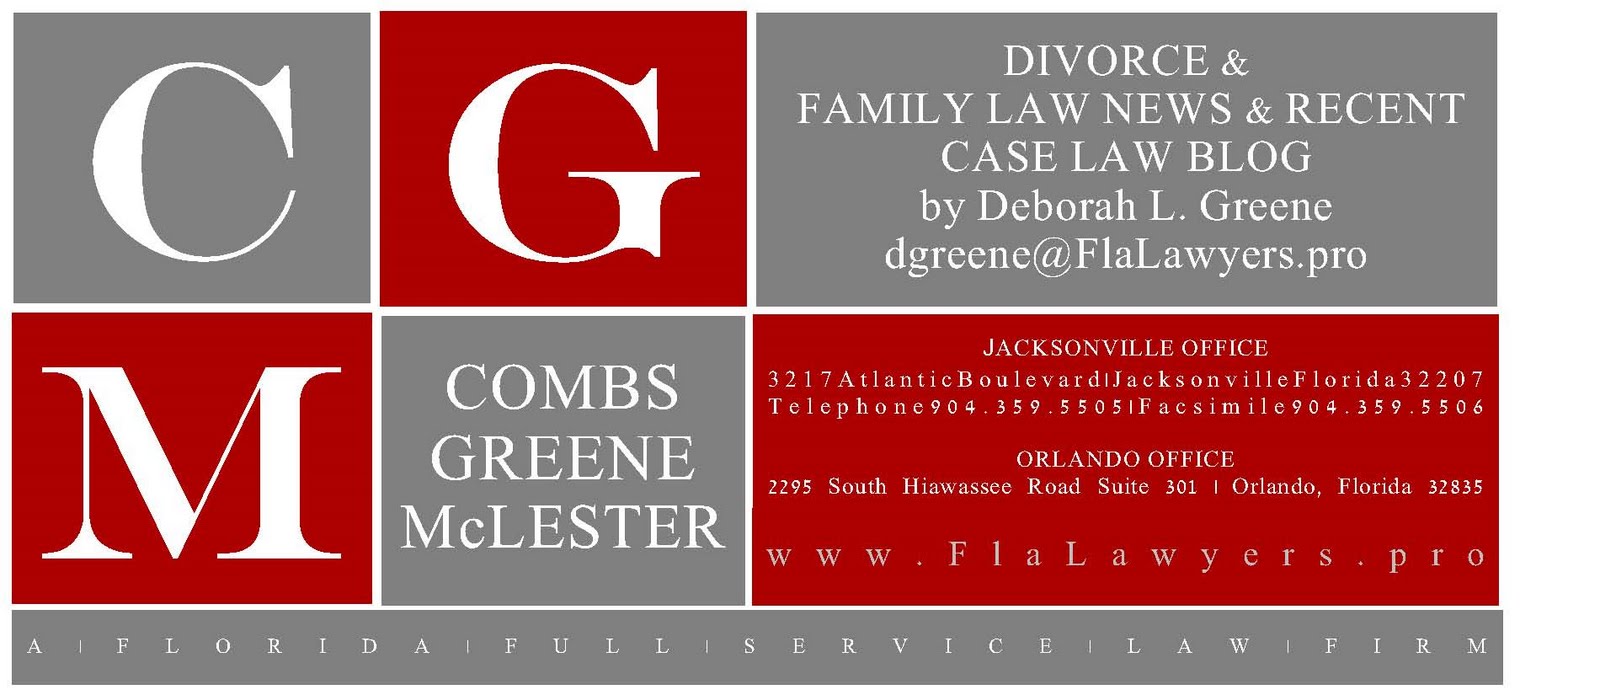 Fla Lawyers - Divorce and Family Law